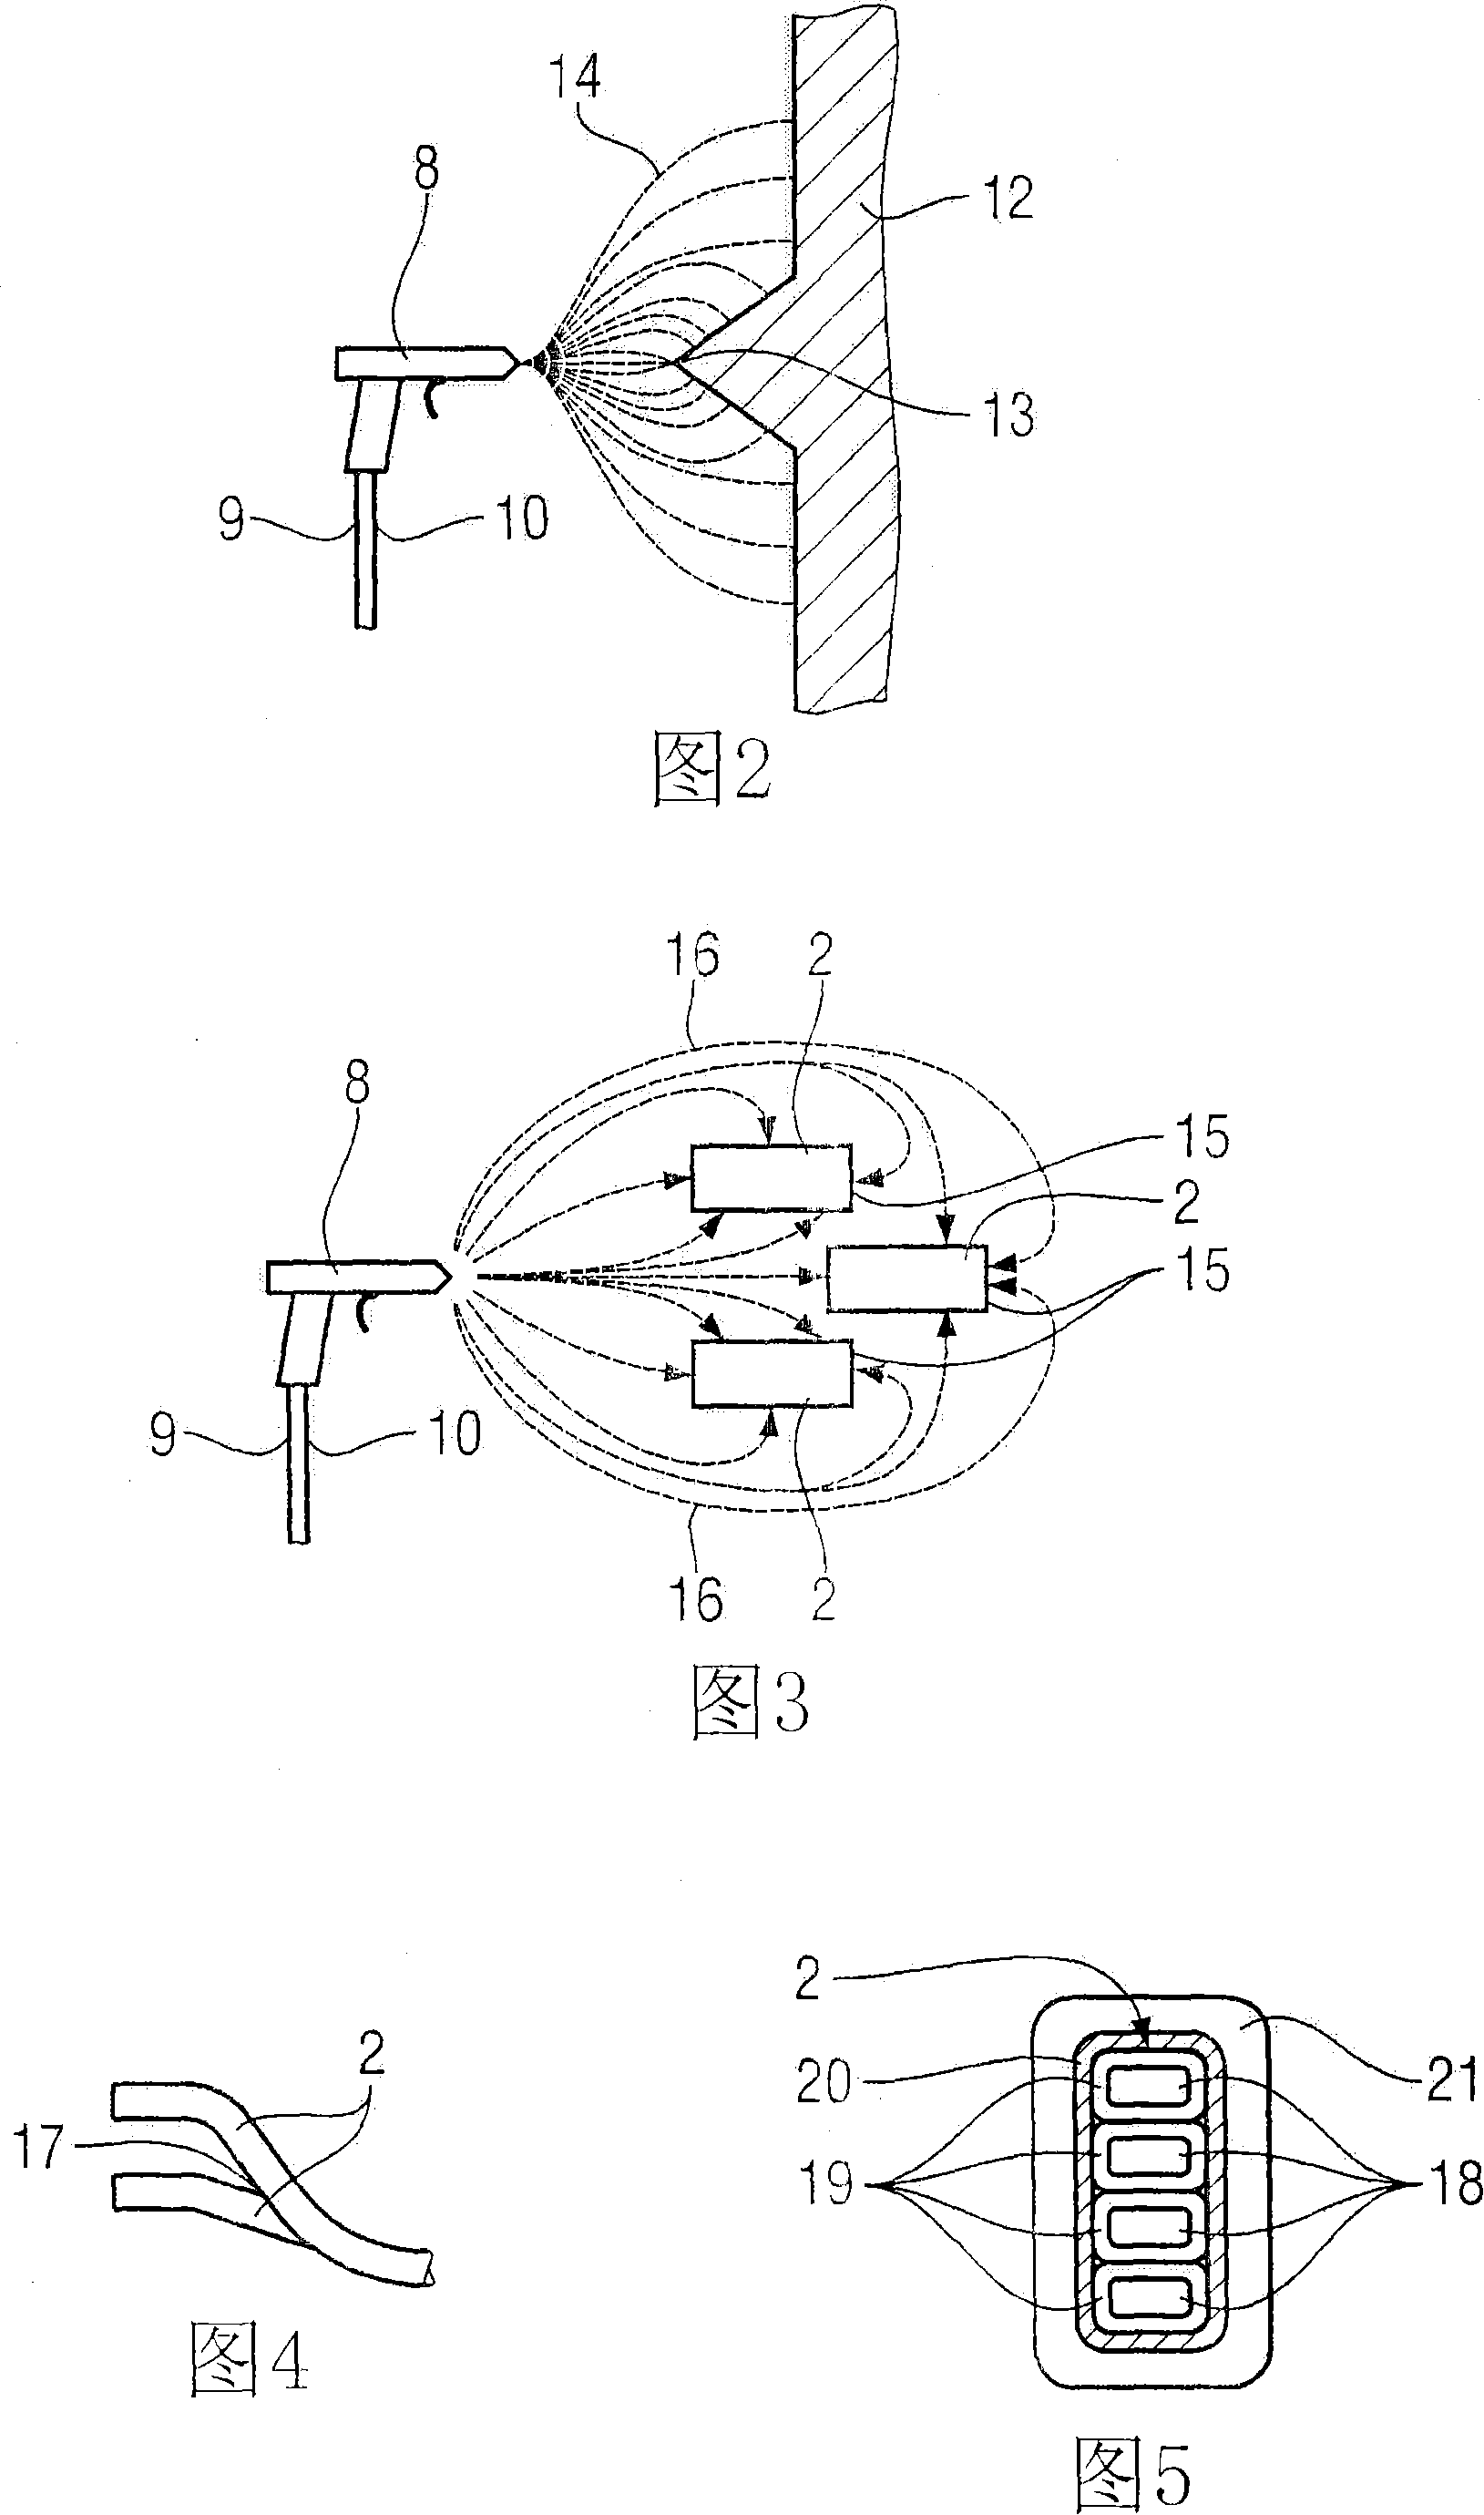 Coating method for an end winding of an electric motor